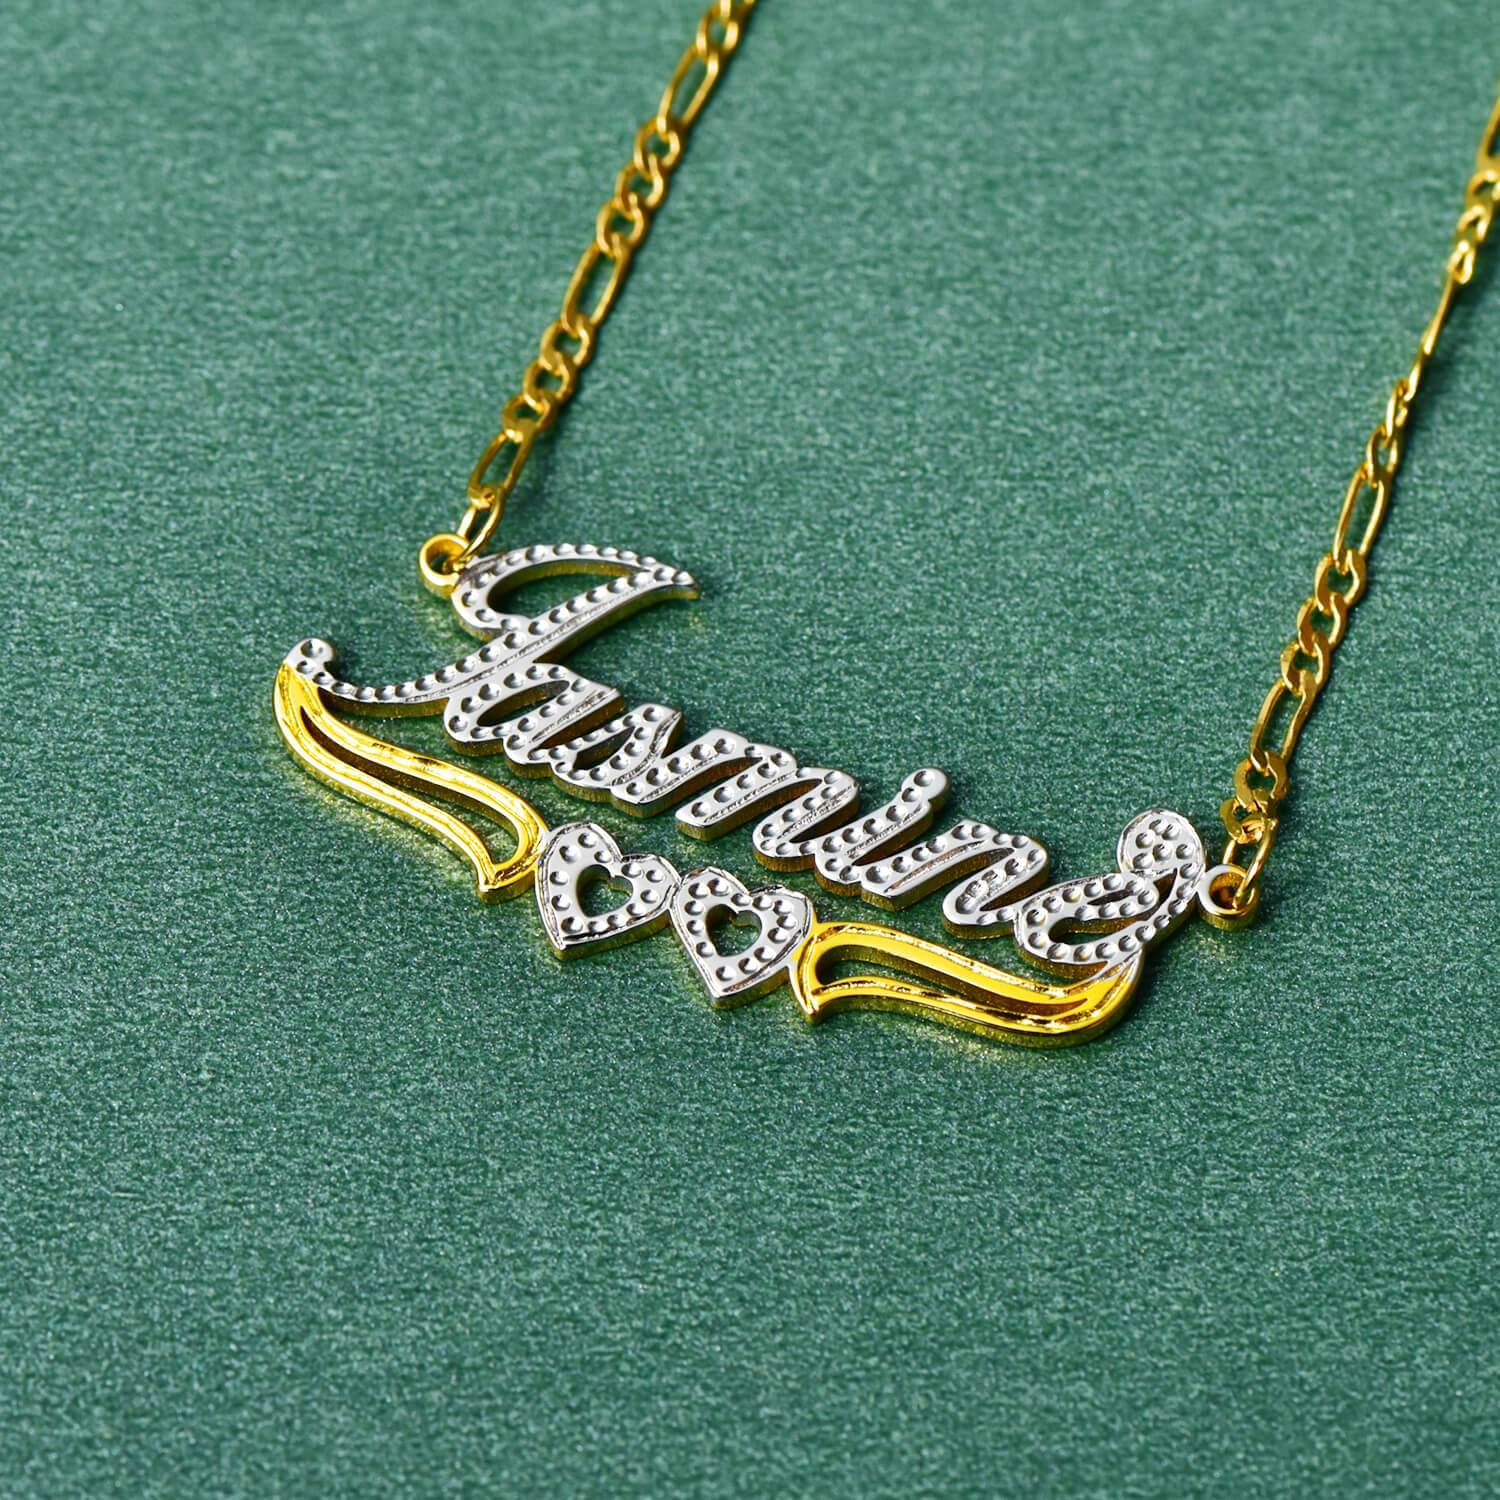 Personalized Two Tone Name Necklace with Double Heart